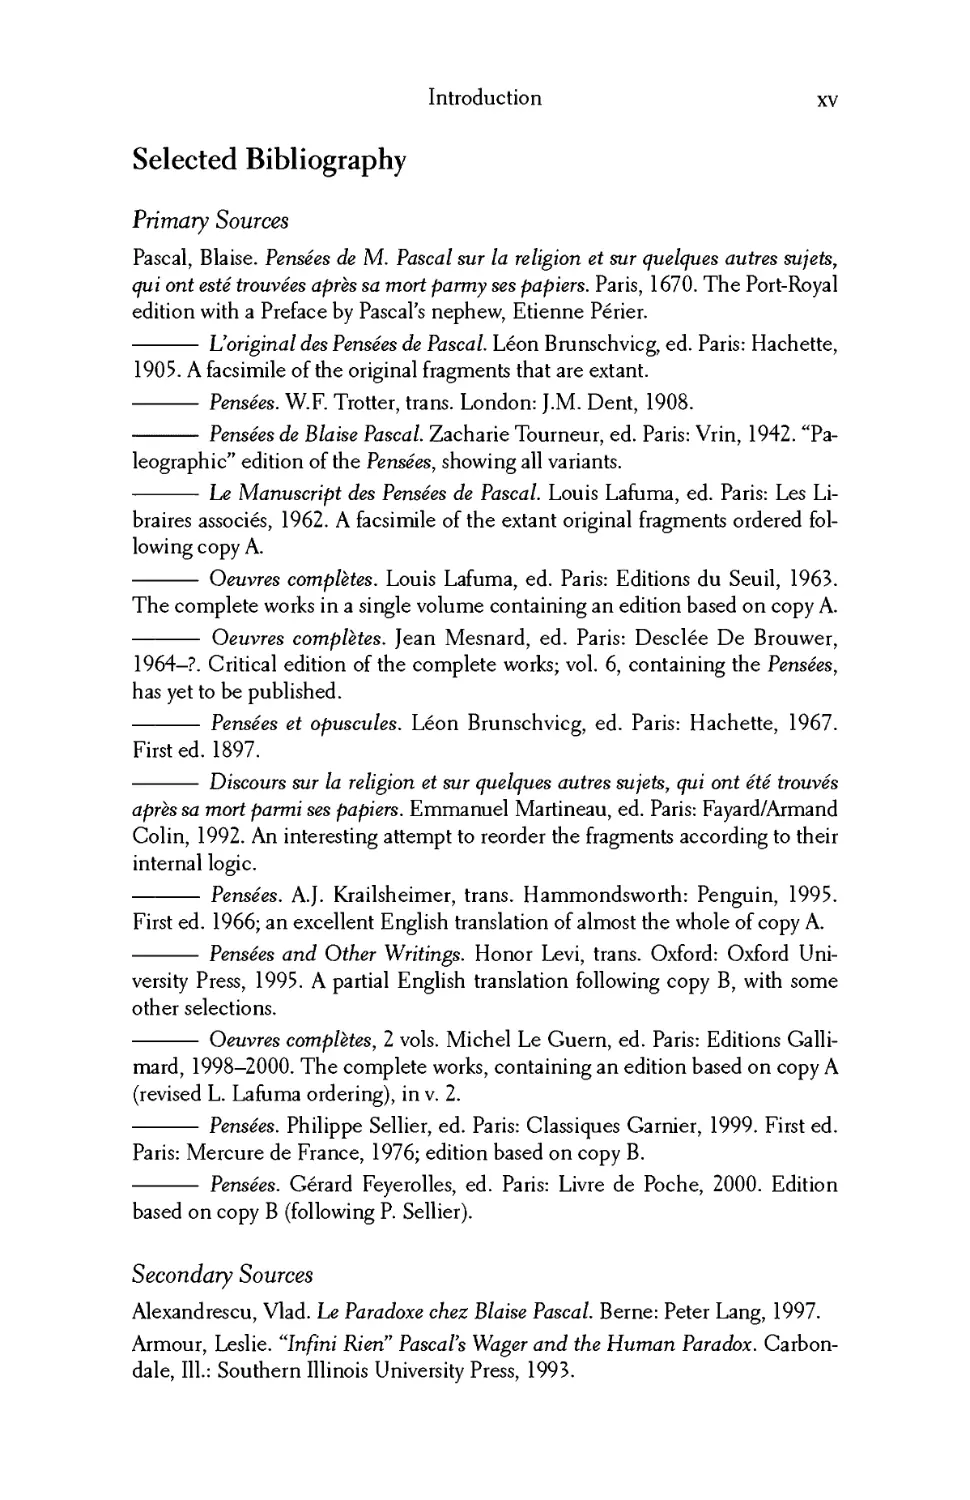 Selected Bibliography of Primary and Secondary Sources